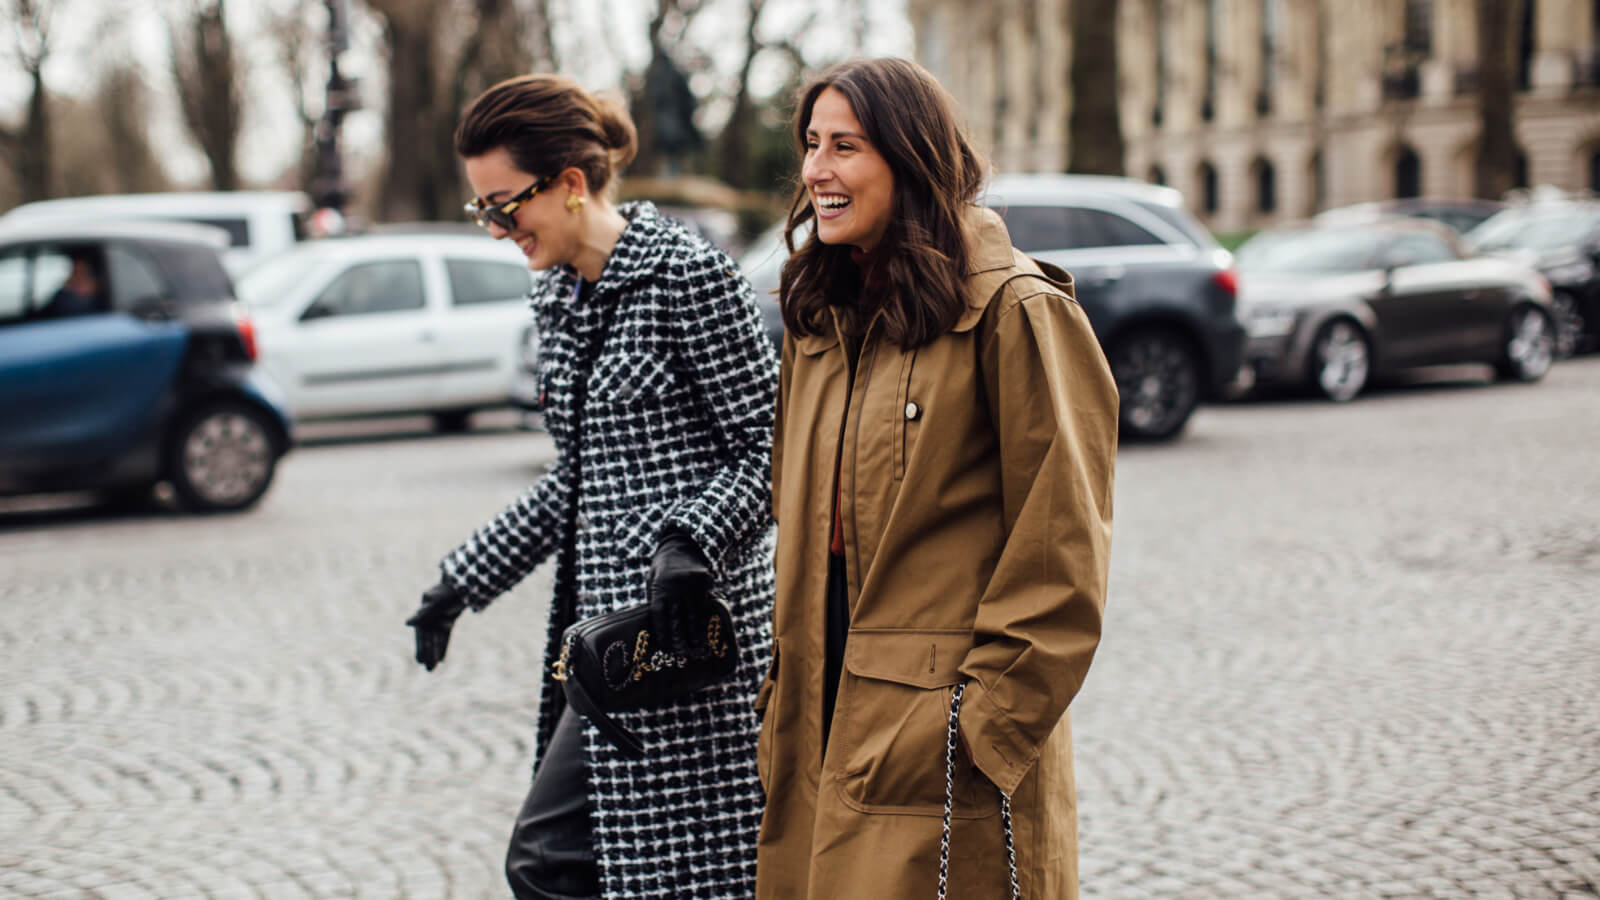 Walk down the street in style with 7 turtleneck recipes for ladies in fall winter 2022